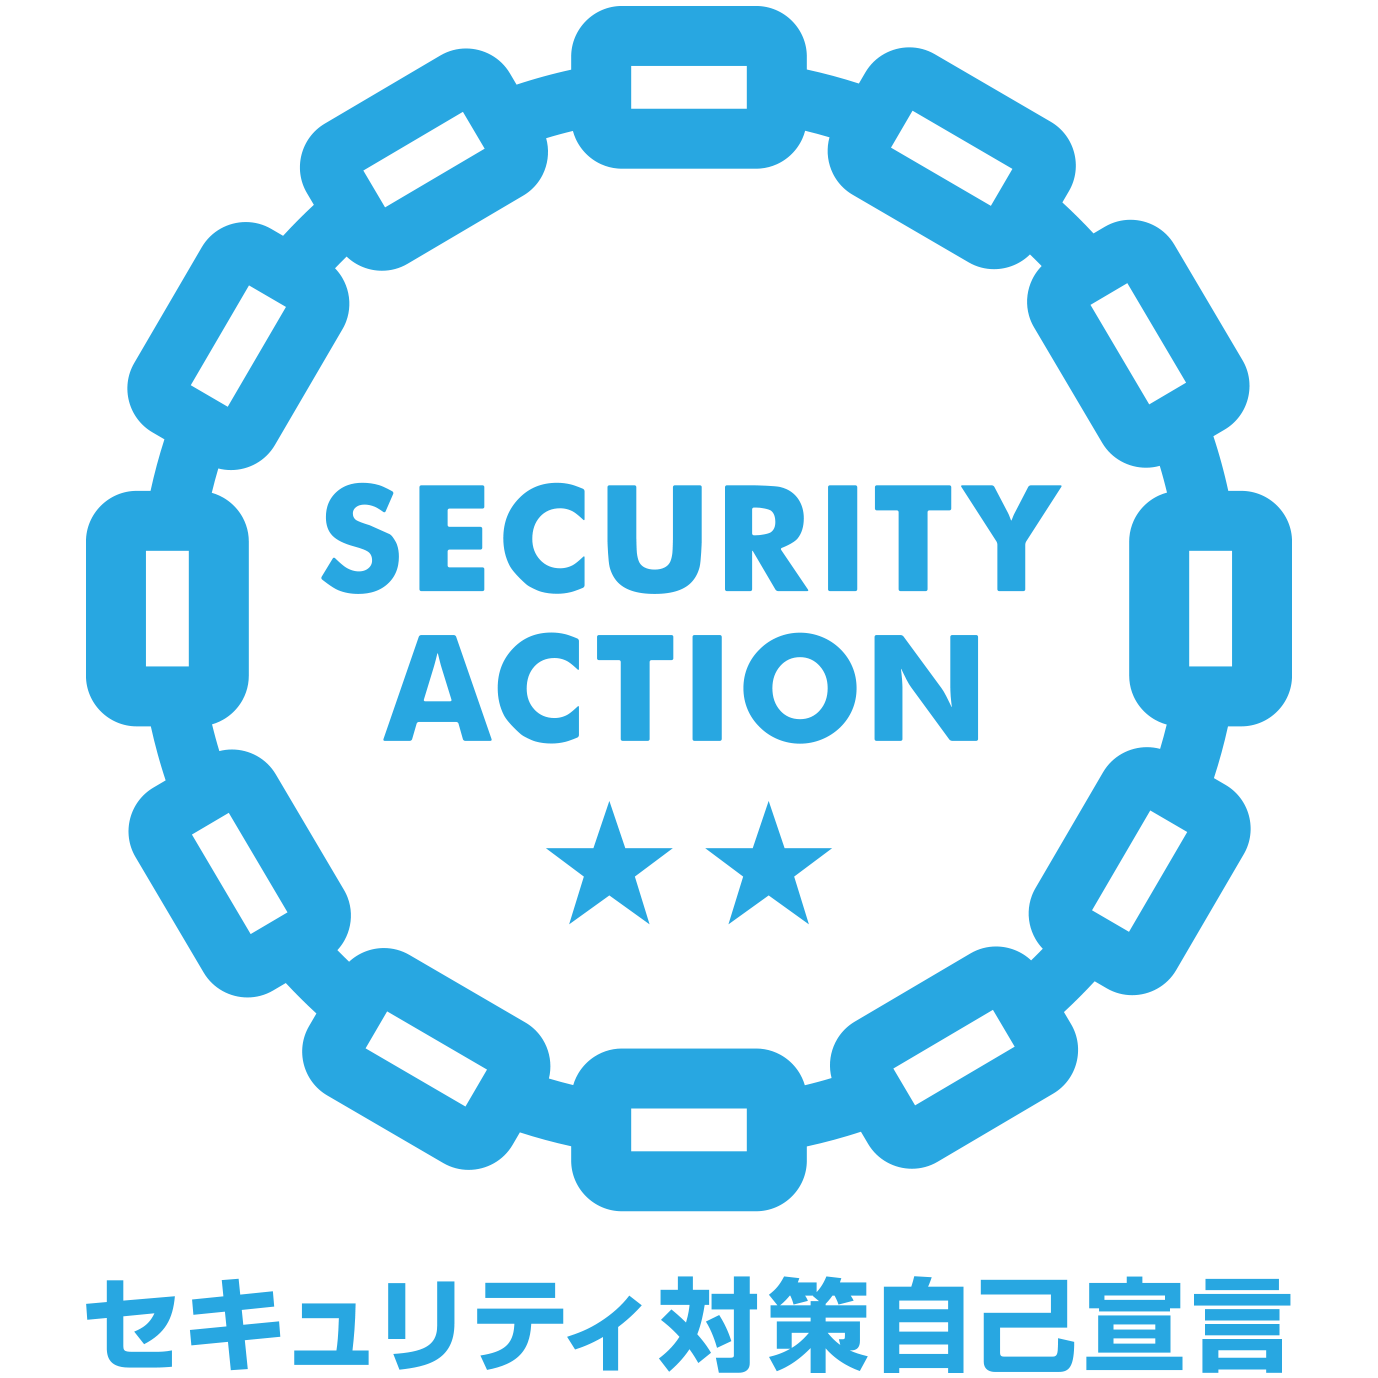 SECURITY ACTION 「二つ星」